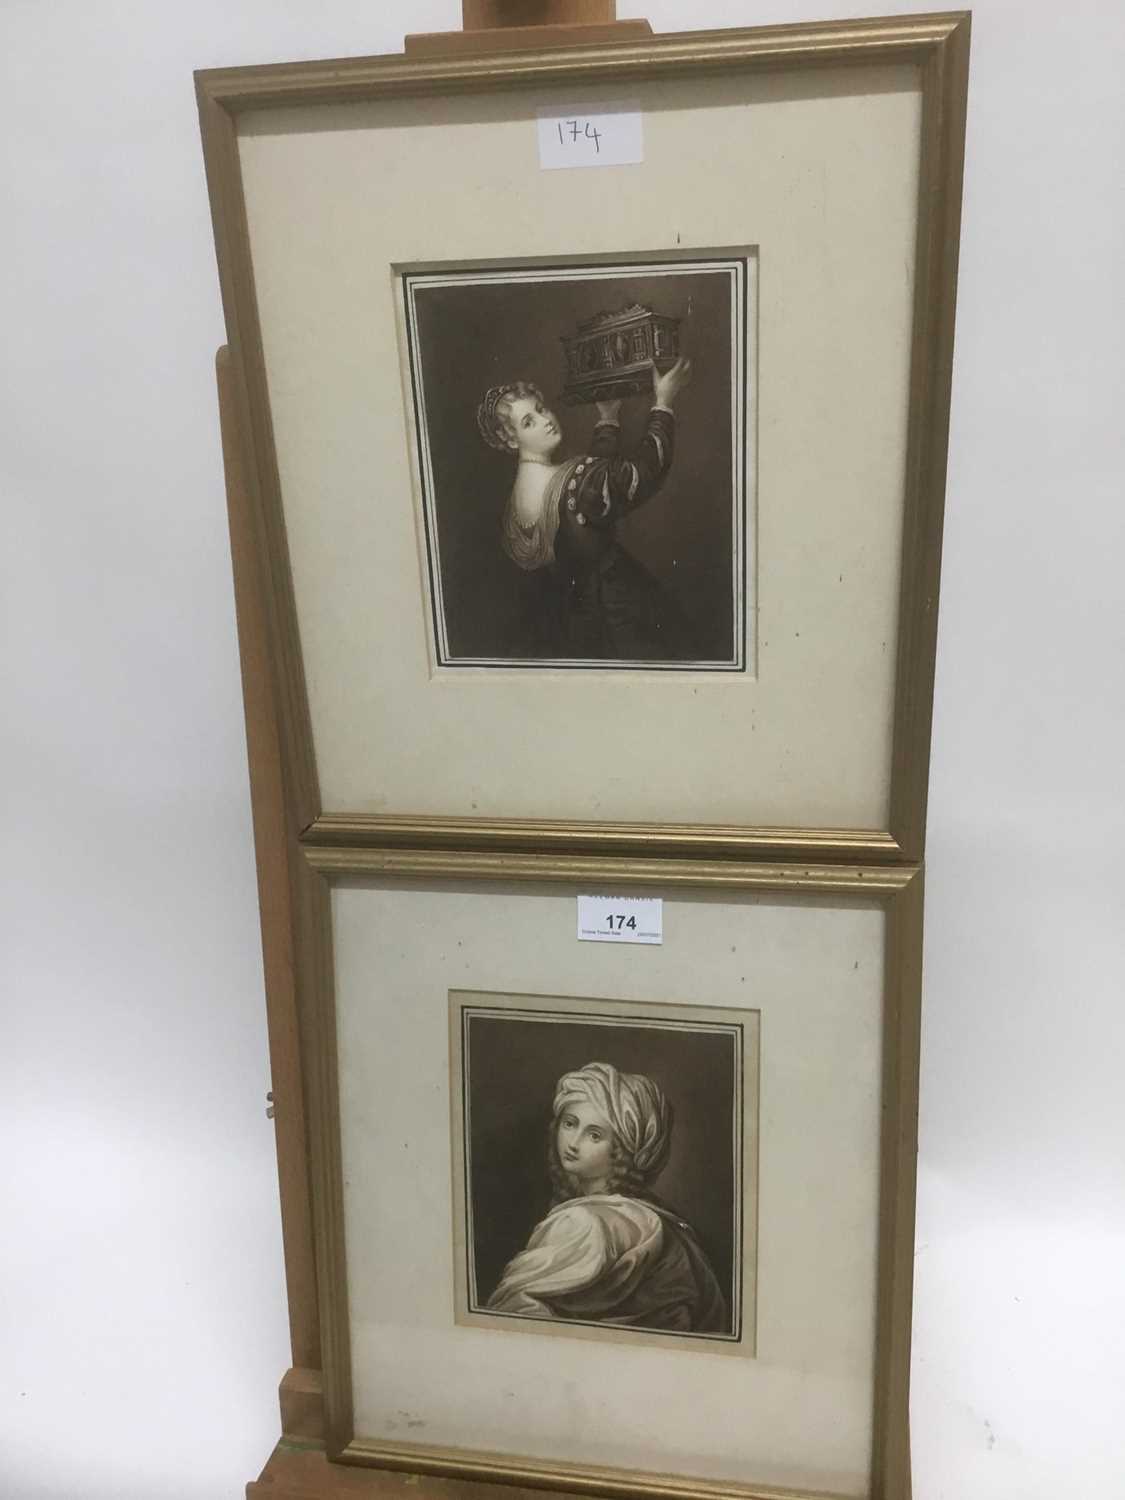 Lot 174 - Attributed to George Perfect Harding (1781-1853) pair of monochrome watercolours - Titian's Daughter and Beaumaris, circa 1832, 15cm x 12.5cm, in gilt frames